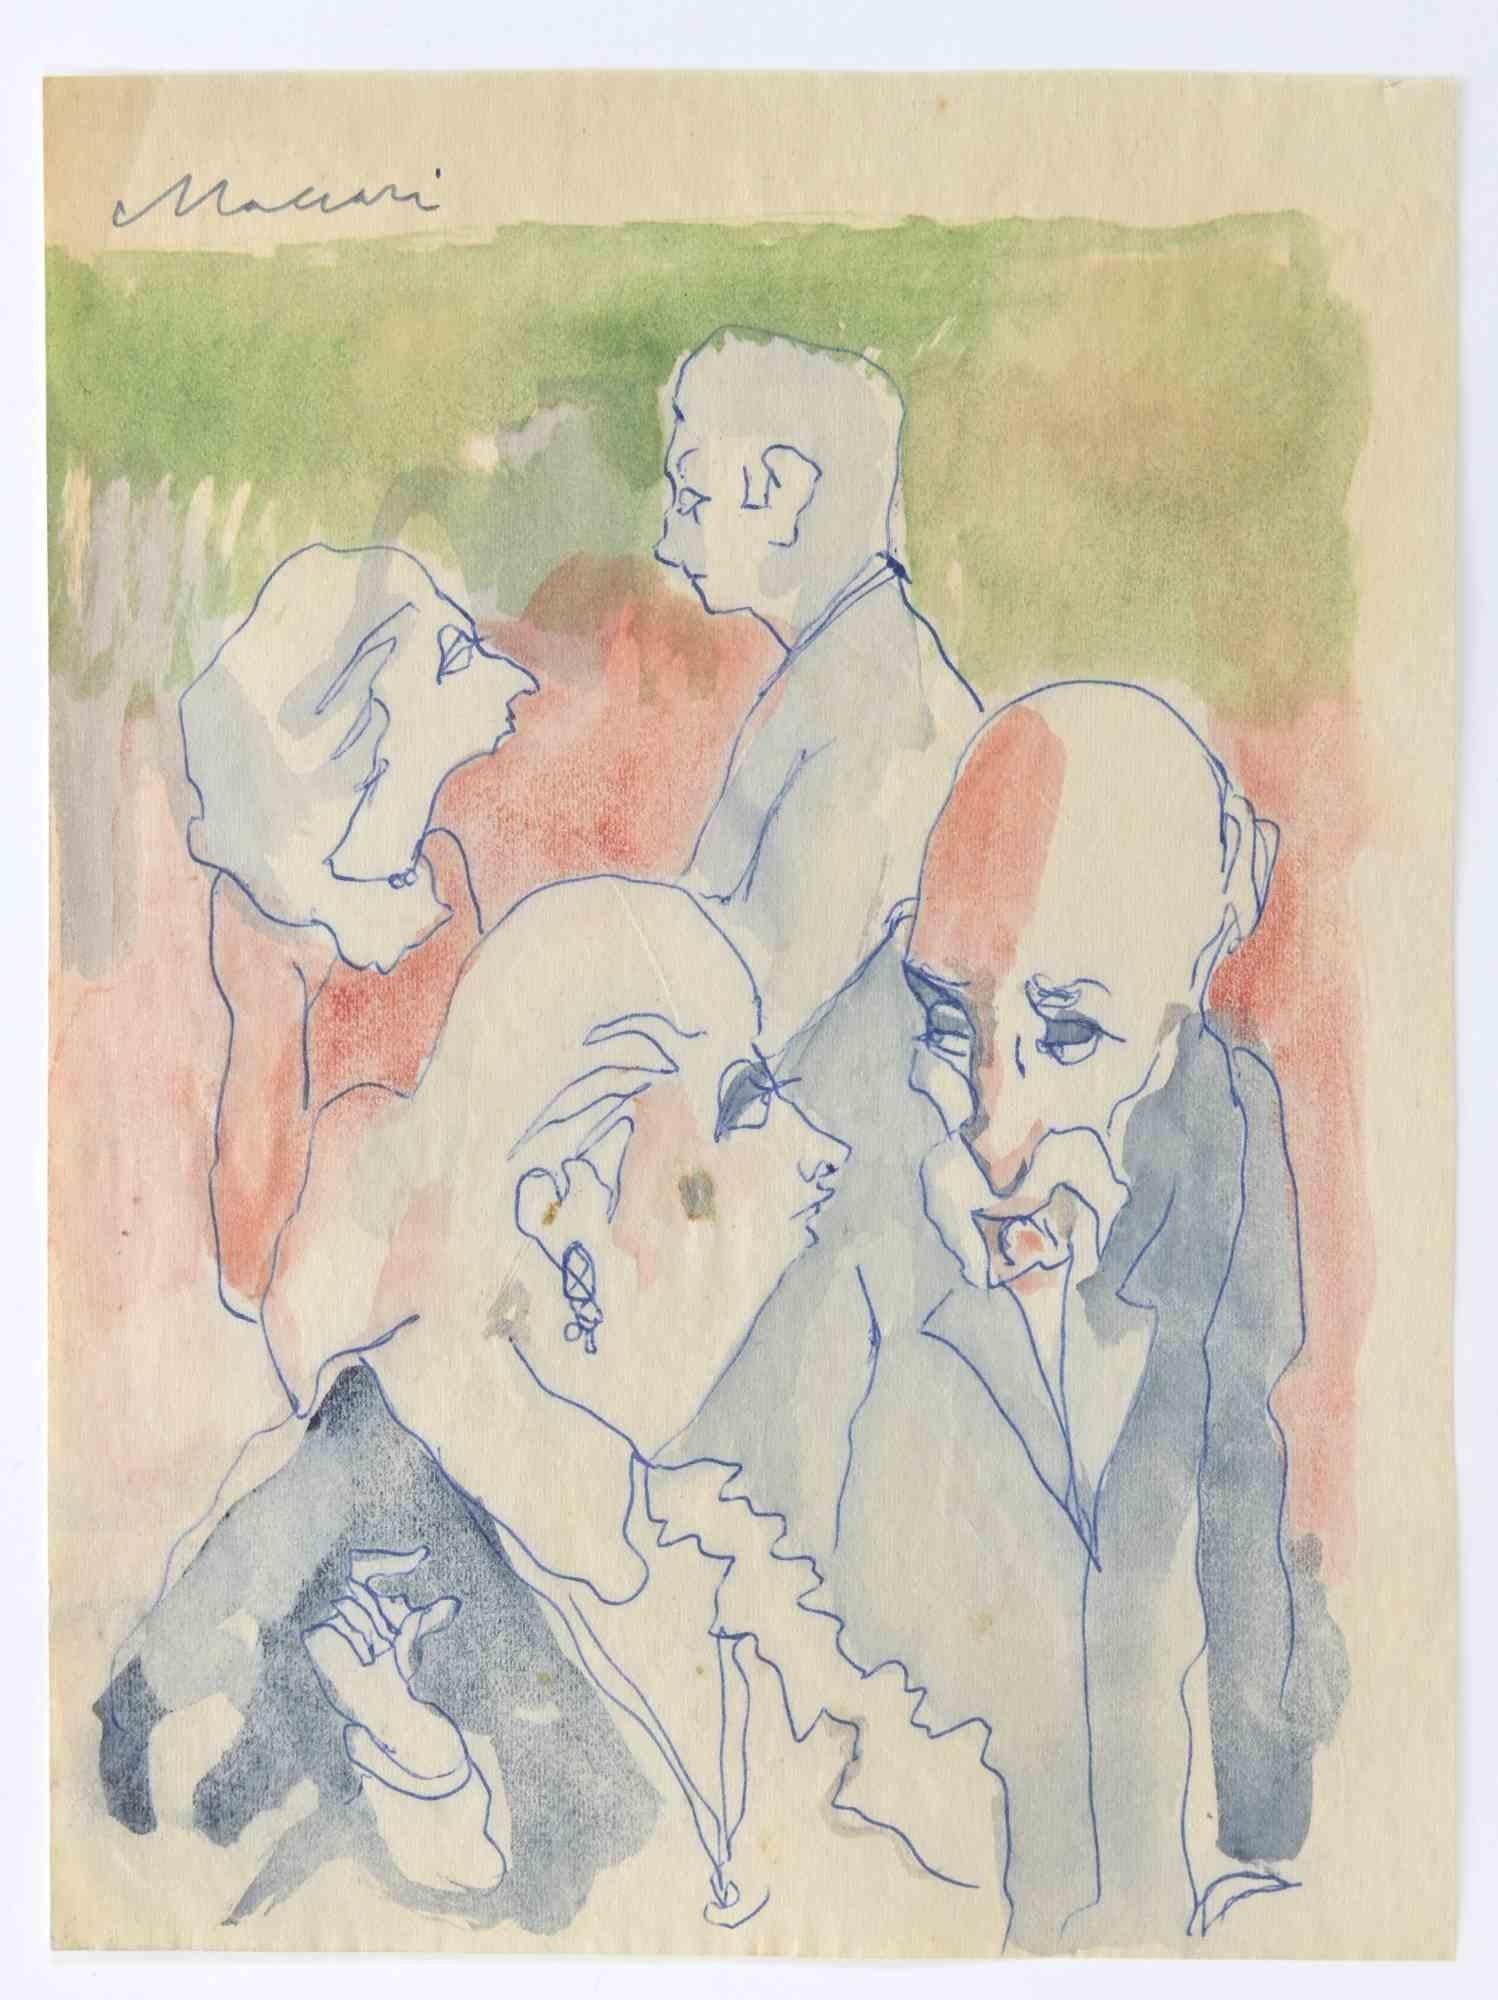 The Couples is a Pen and watercolor Drawing realized by Mino Maccari  (1924-1989) in the 1960s.

Hand-signed at the top margin.

Good conditions.

Mino Maccari (Siena, 1924-Rome, June 16, 1989) was an Italian writer, painter, engraver and